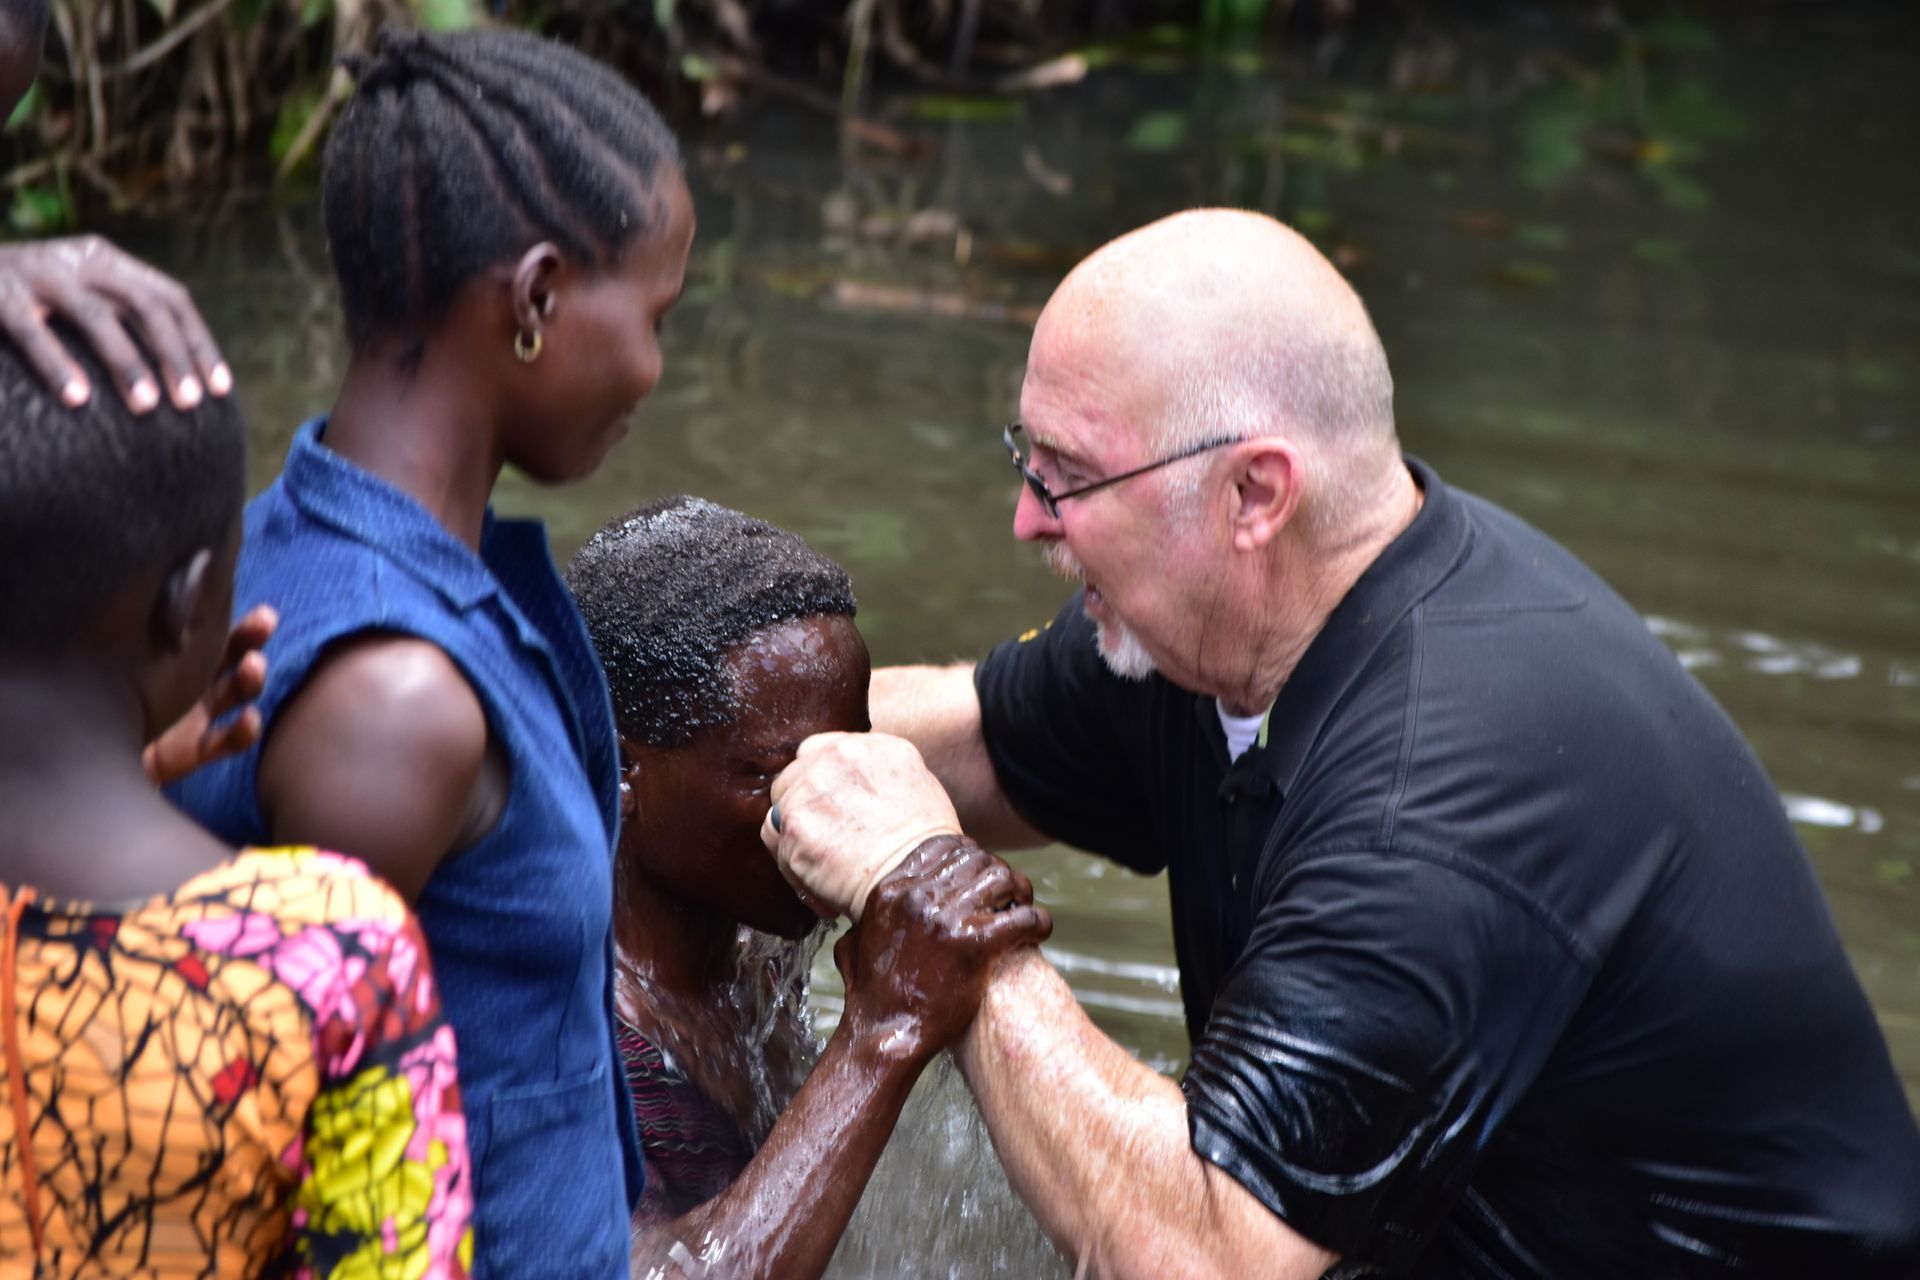 CEO Michael Ryer is baptizing a young girl in a river.